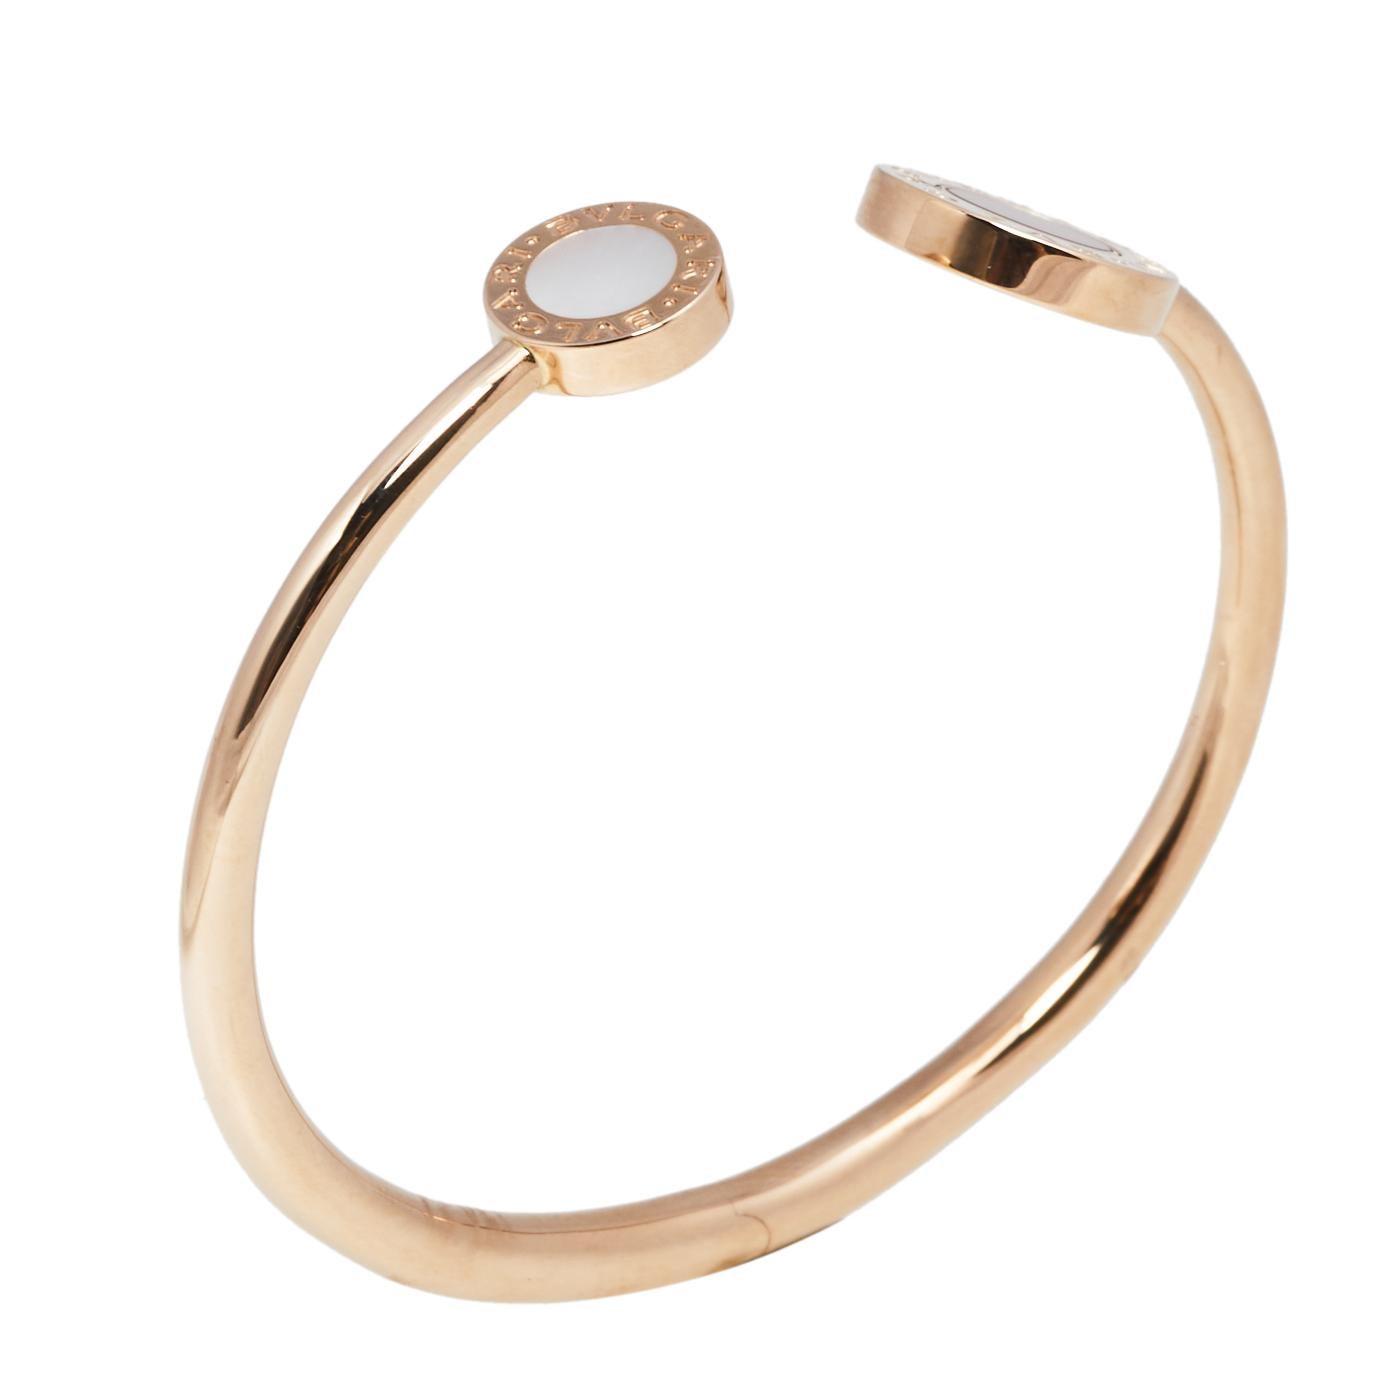 Elevate your look instantly with this Bvlgari bracelet. Crafted from 18k rose gold in a simple bangle style with an open cuff design, this piece carries two circular ends inlaid with mother of pearl and carnelian. Easy to wear and versatile in use,